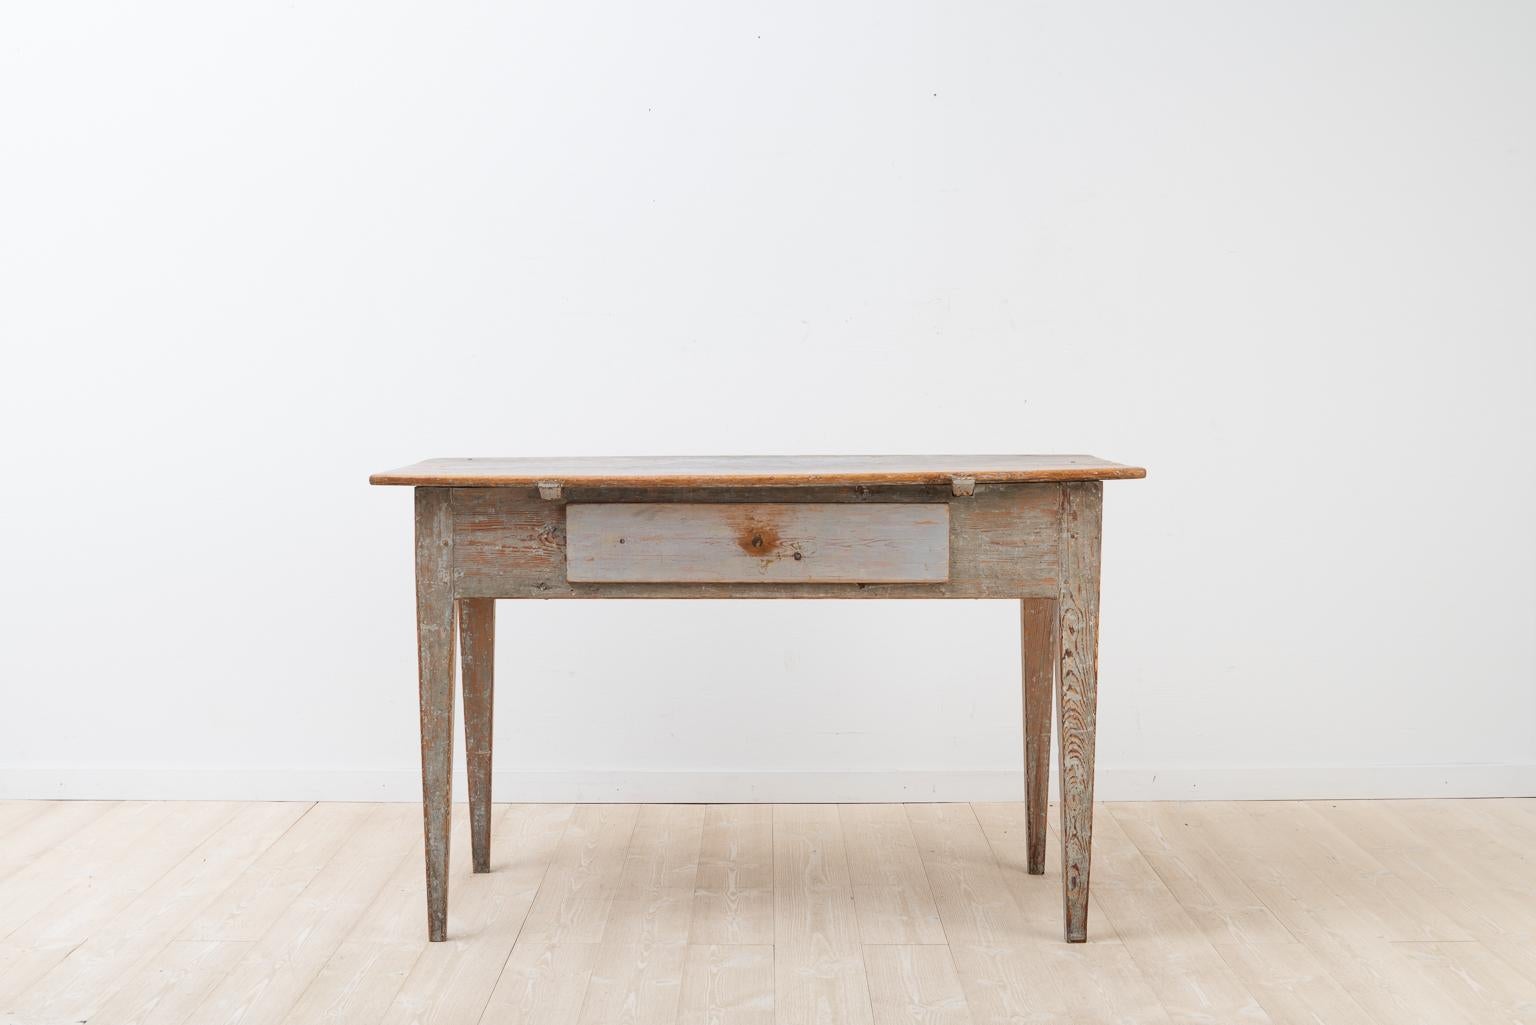 Gustavian folk art table / desk. Manufactured in northern Sweden from pine. From around year 1800. Dry scraped to the original paint. Healthy and solid frame. Charming natural patina. The height from the floor to the rim is 56 cm.